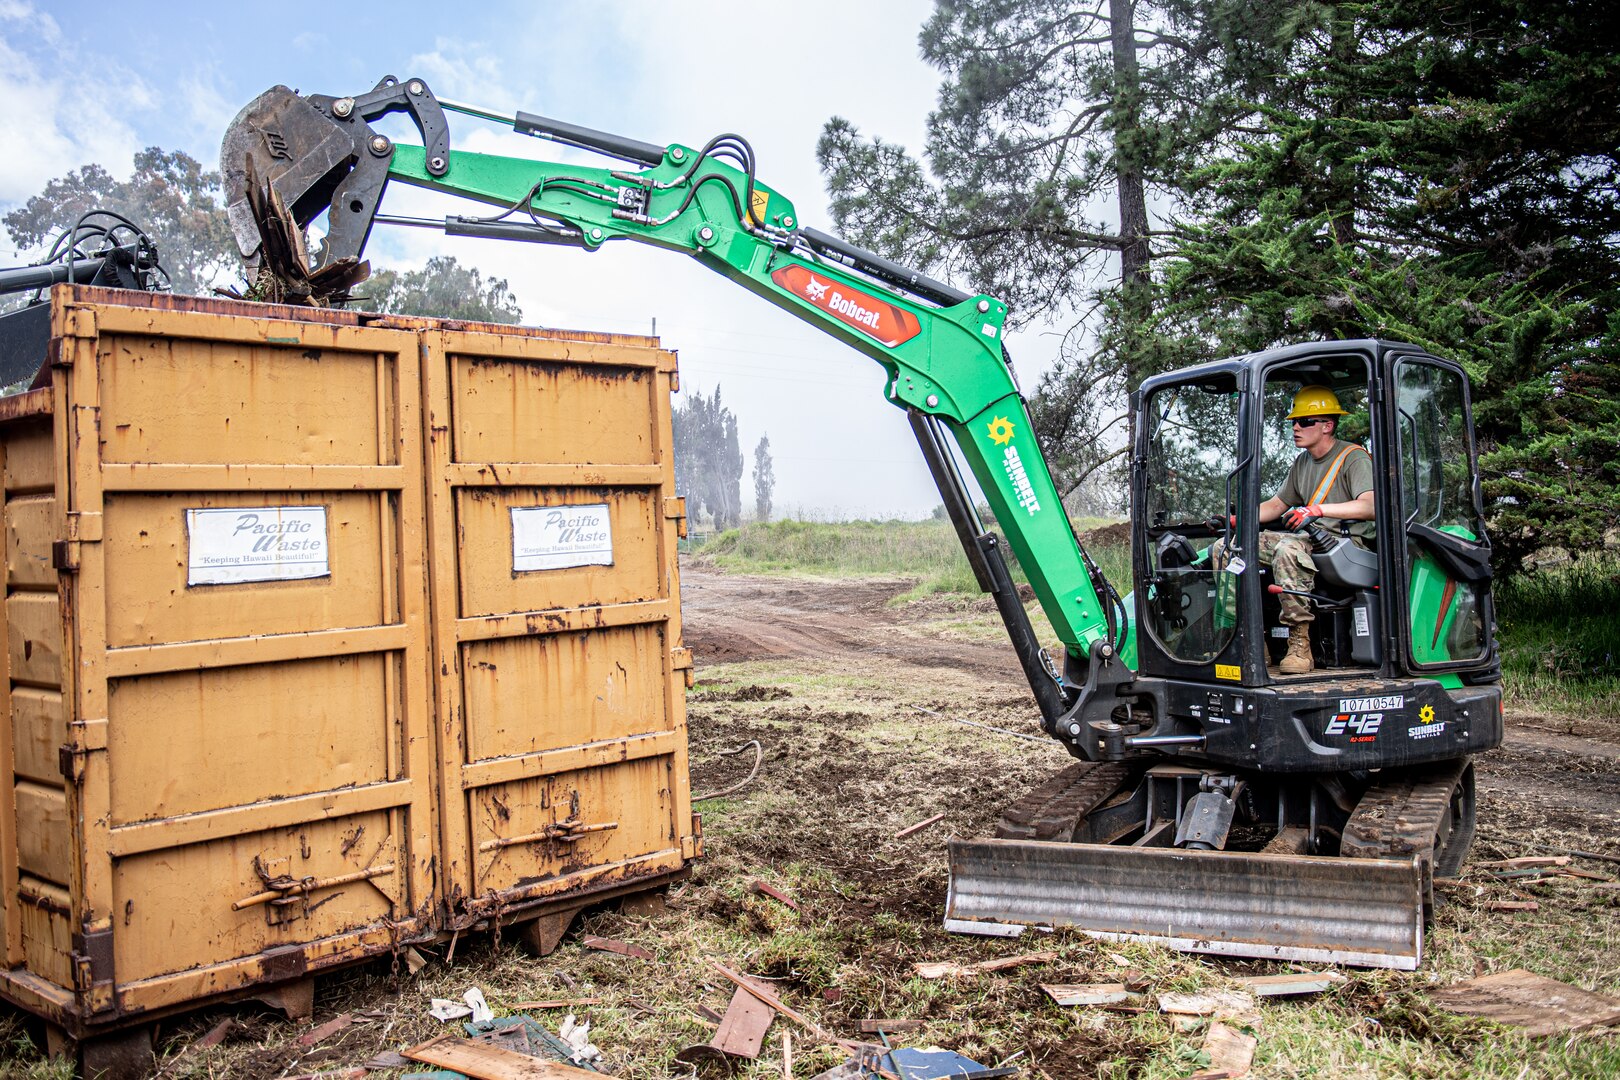 Spc. Austin Mears, a Stillwater, Oklahoma resident serving as a horizontal construction engineer with the 3120th Engineer Support Company, 120th Engineer Battalion, 90th Troop Command, Oklahoma Army National Guard, loads debris into a dumpster during renovations at the Girl Scouts of Hawaii's Camp Kilohana near Pahokuloa Training Area, Hawaii, June 14, 2023.

The Soldiers of the 3120th ESC are taking part in an Innovative Readiness Training program to improve their skills as Army engineers while providing the Girl Scout camp with improvements. (Oklahoma National Guard photo by Sgt. Anthony Jones)